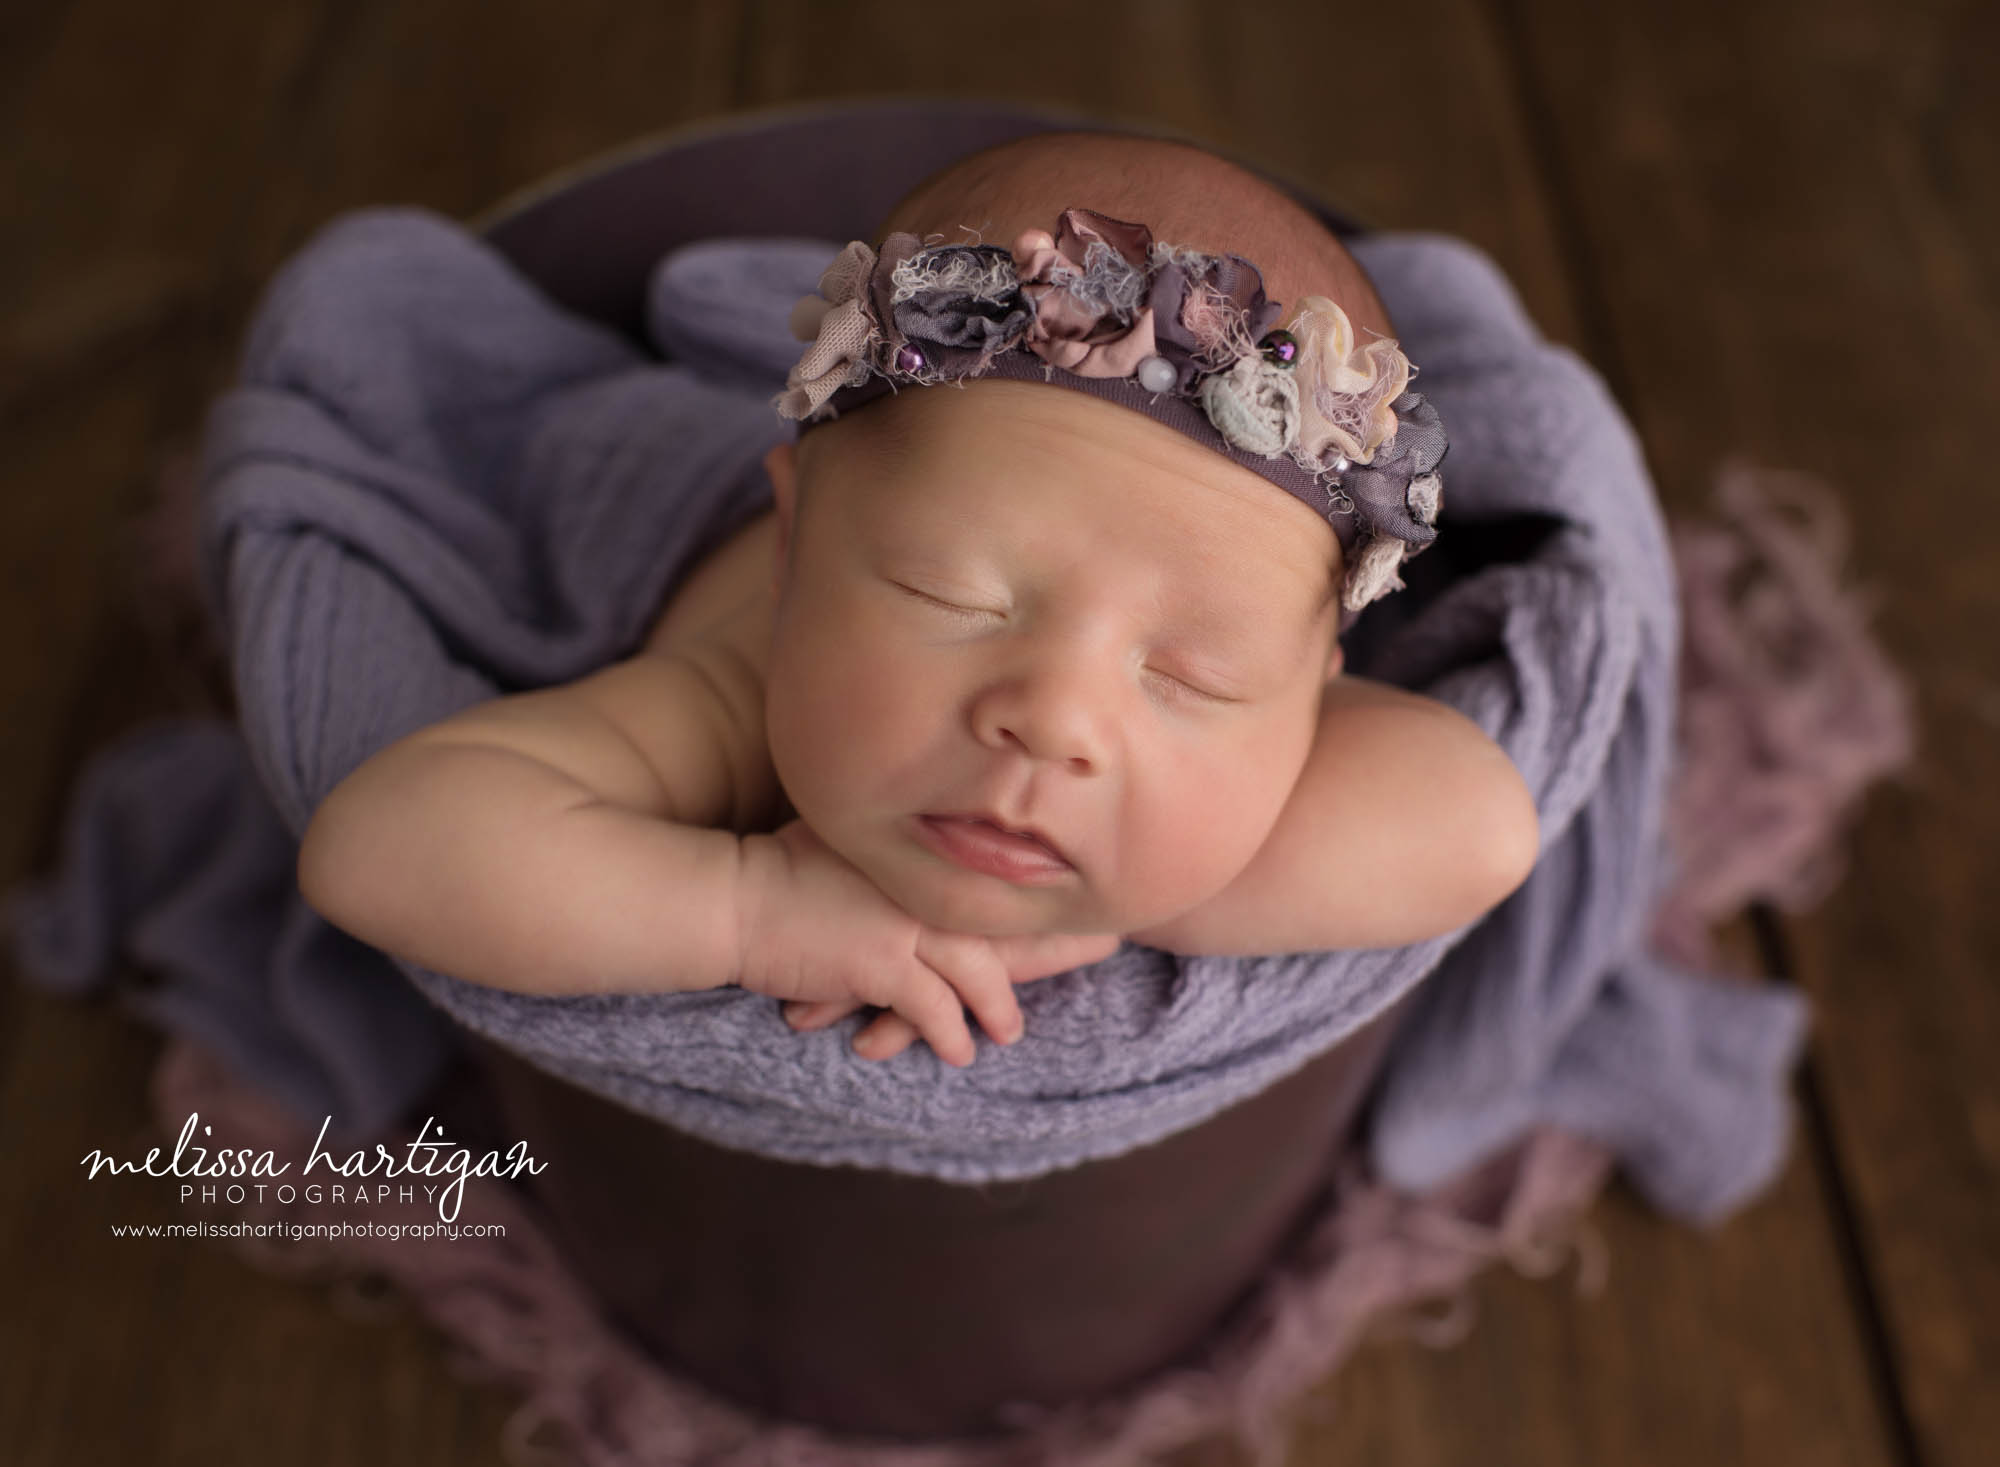 newborn baby girl posed in bucket wearing floral headband and purple draping